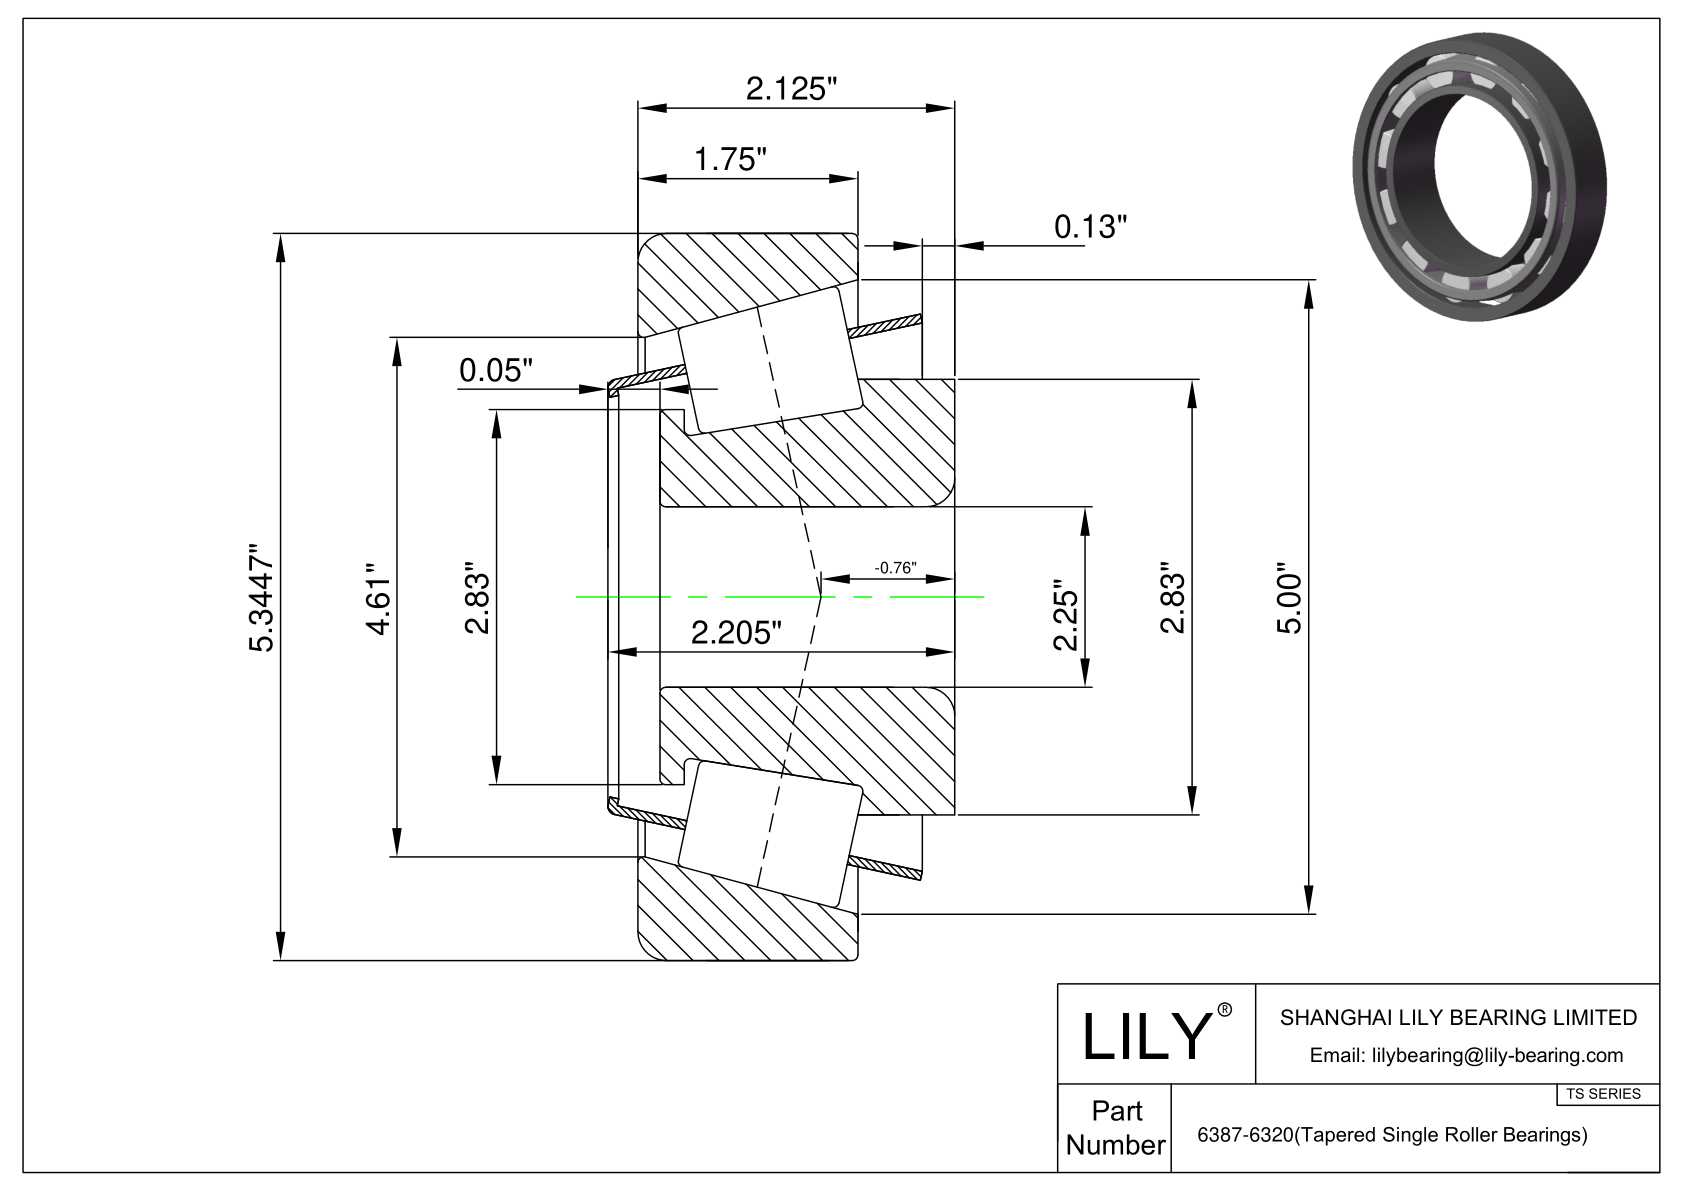 6387-6320 TS (Tapered Single Roller Bearings) (Imperial) cad drawing